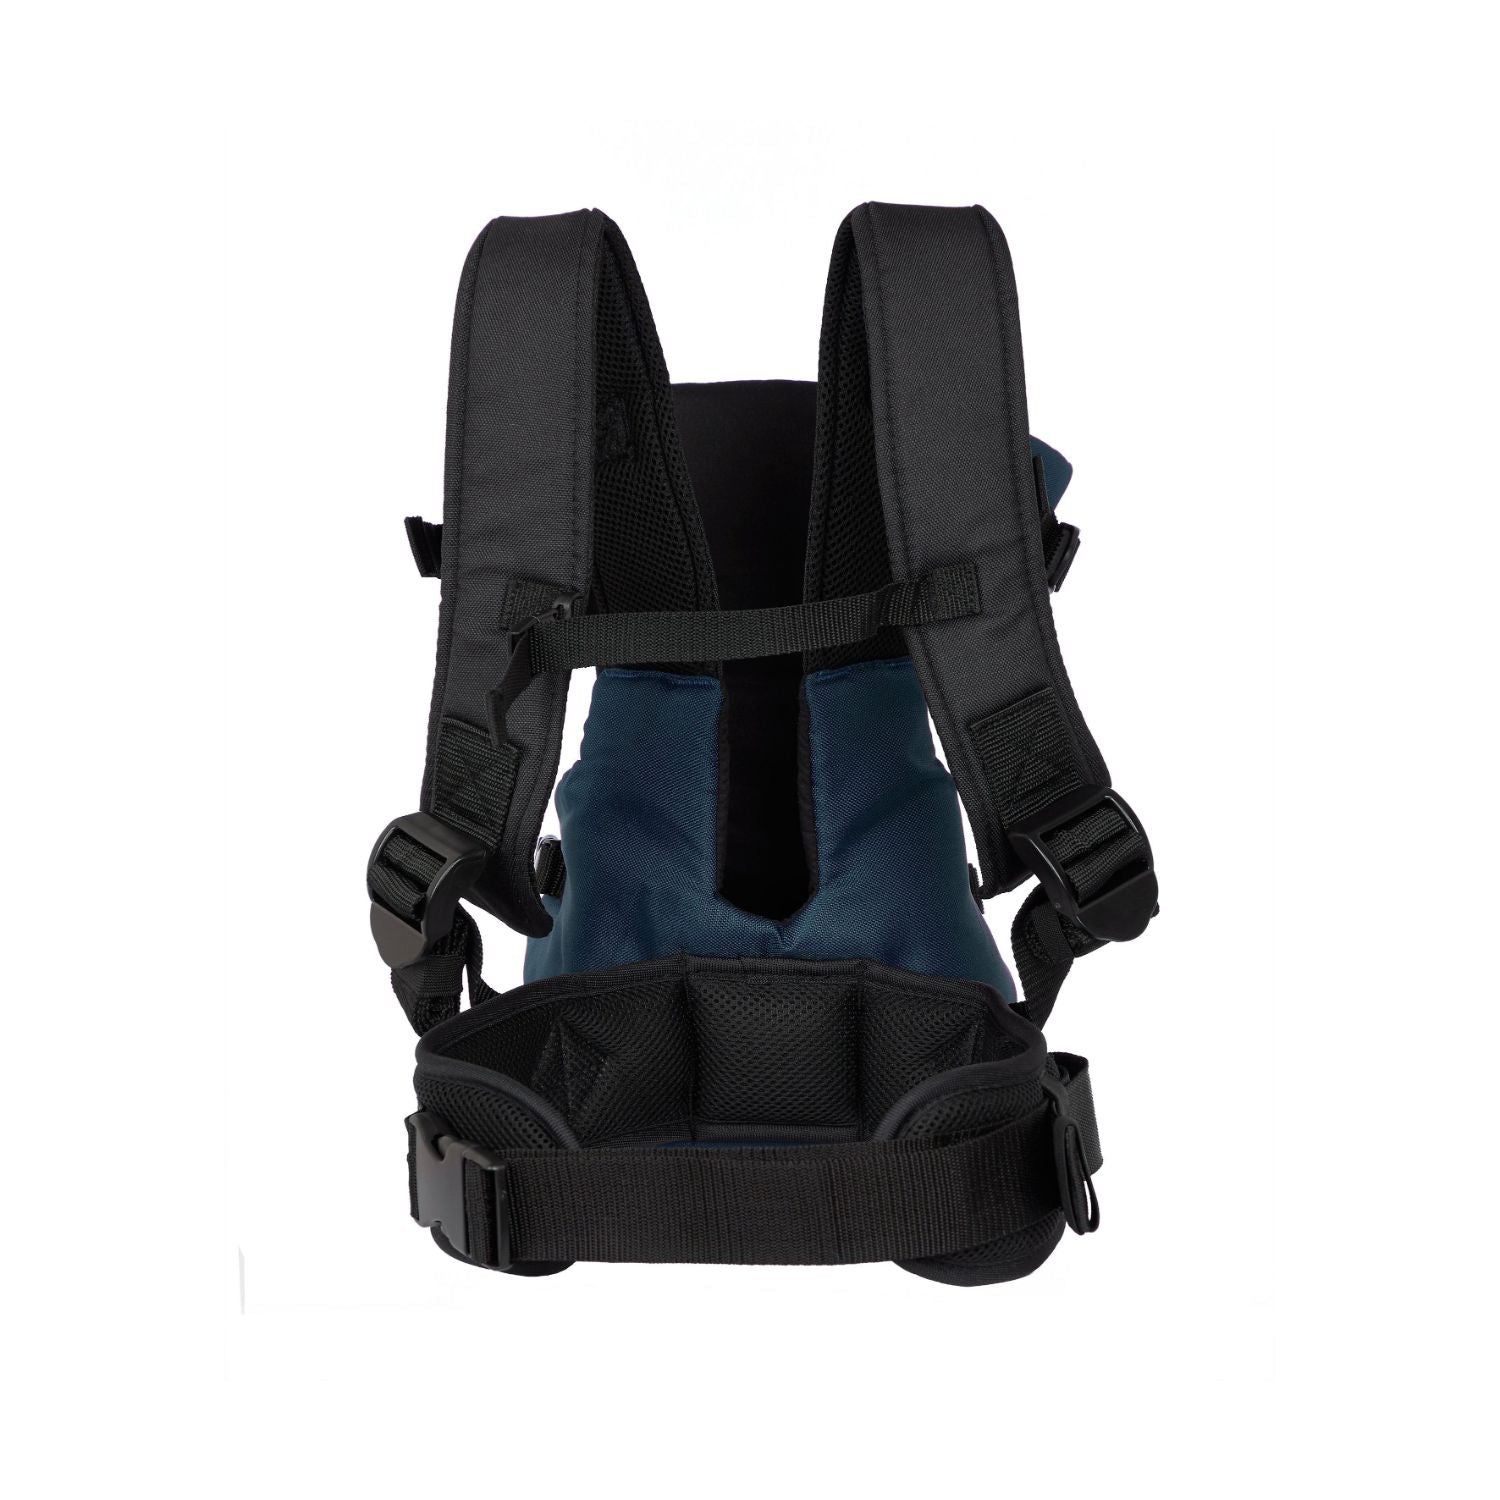 Mothercare 3 Position Baby Carrier